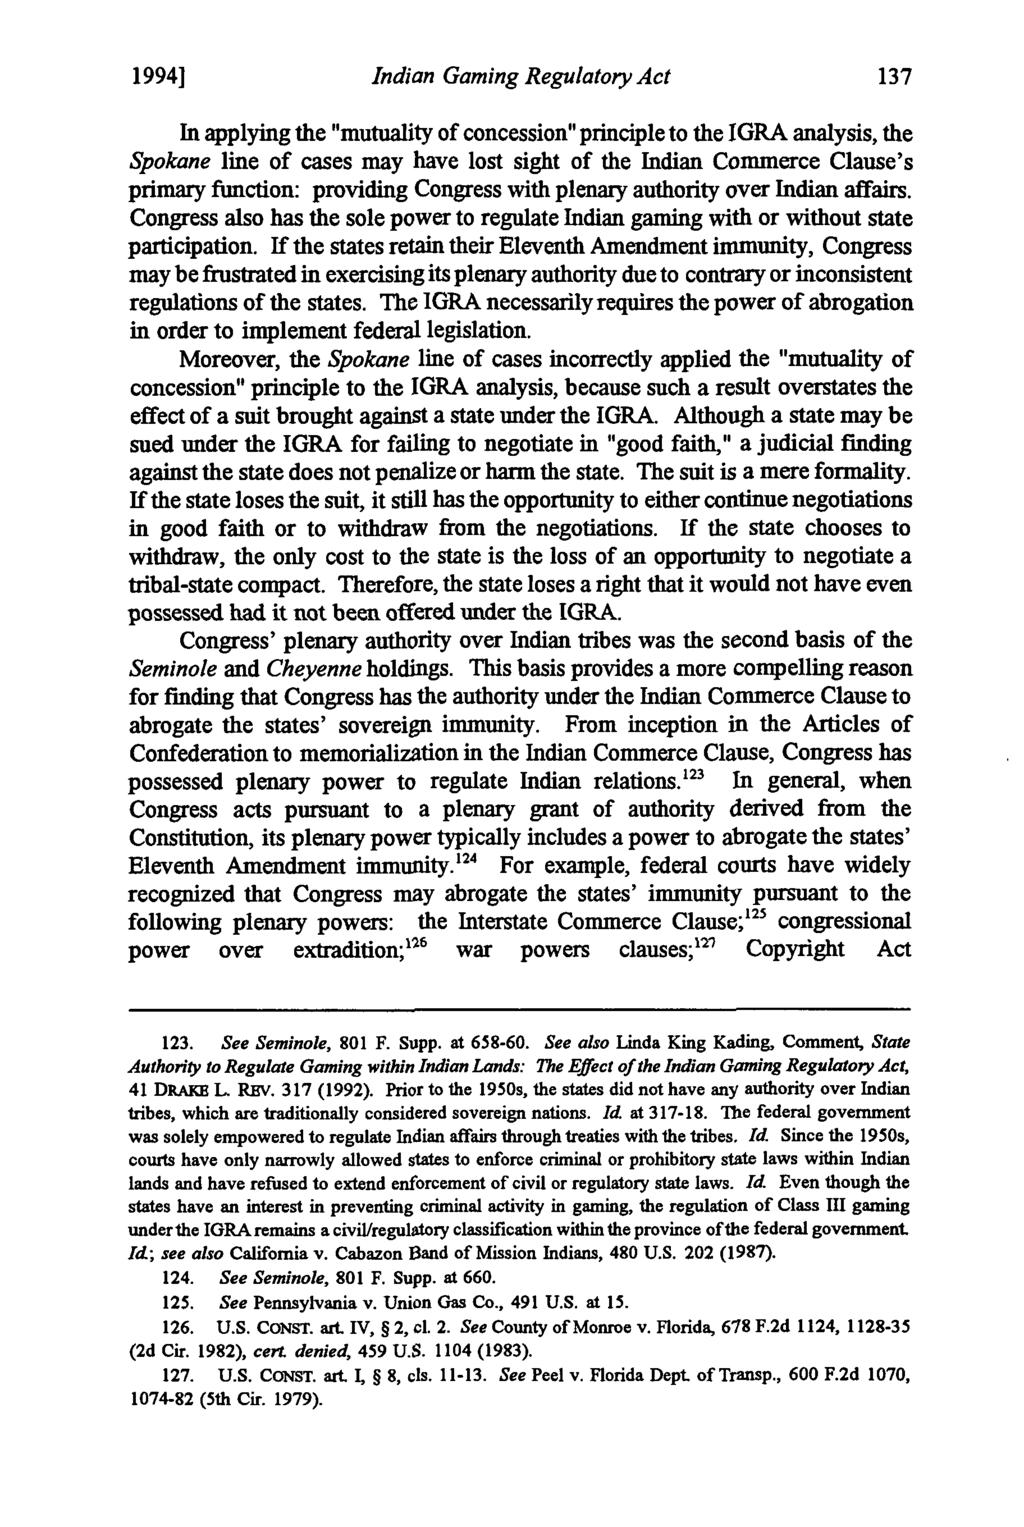 19941 Brous: Brous: Constitutionality of the Indian Gaming Regulatory Act: Indian Gaming Regulatory Act In applying the "mutuality of concession" principle to the IGRA analysis, the Spokane line of